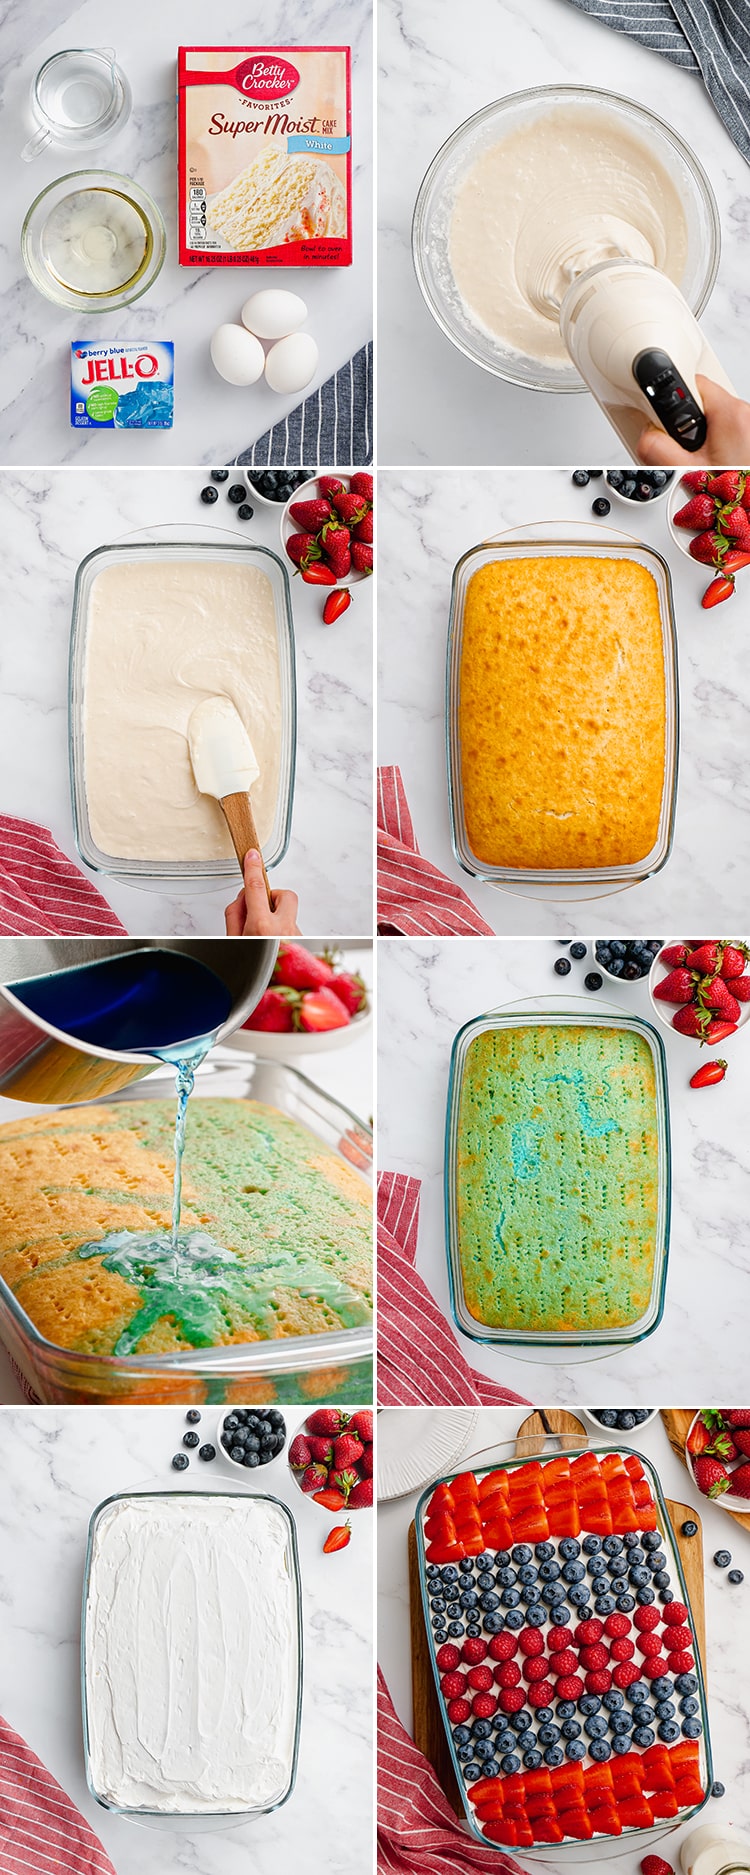 Step by step photos of a blue jello poke cake being made